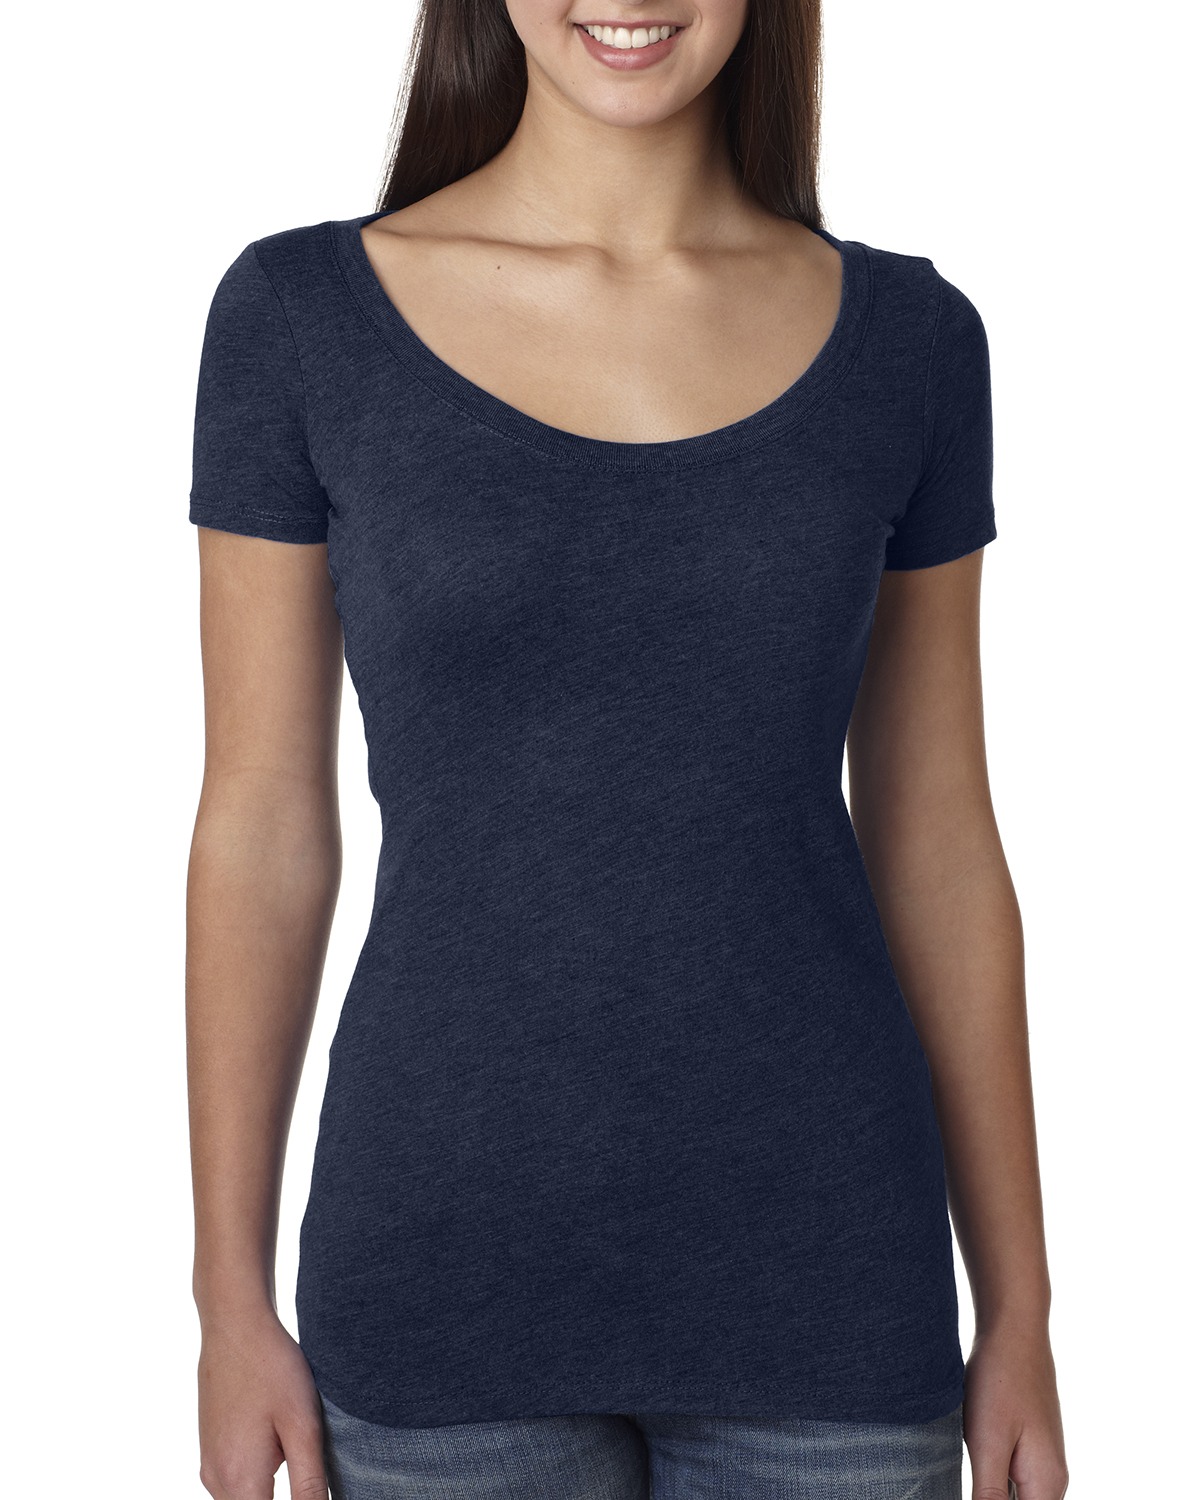 click to view VINT NAVY